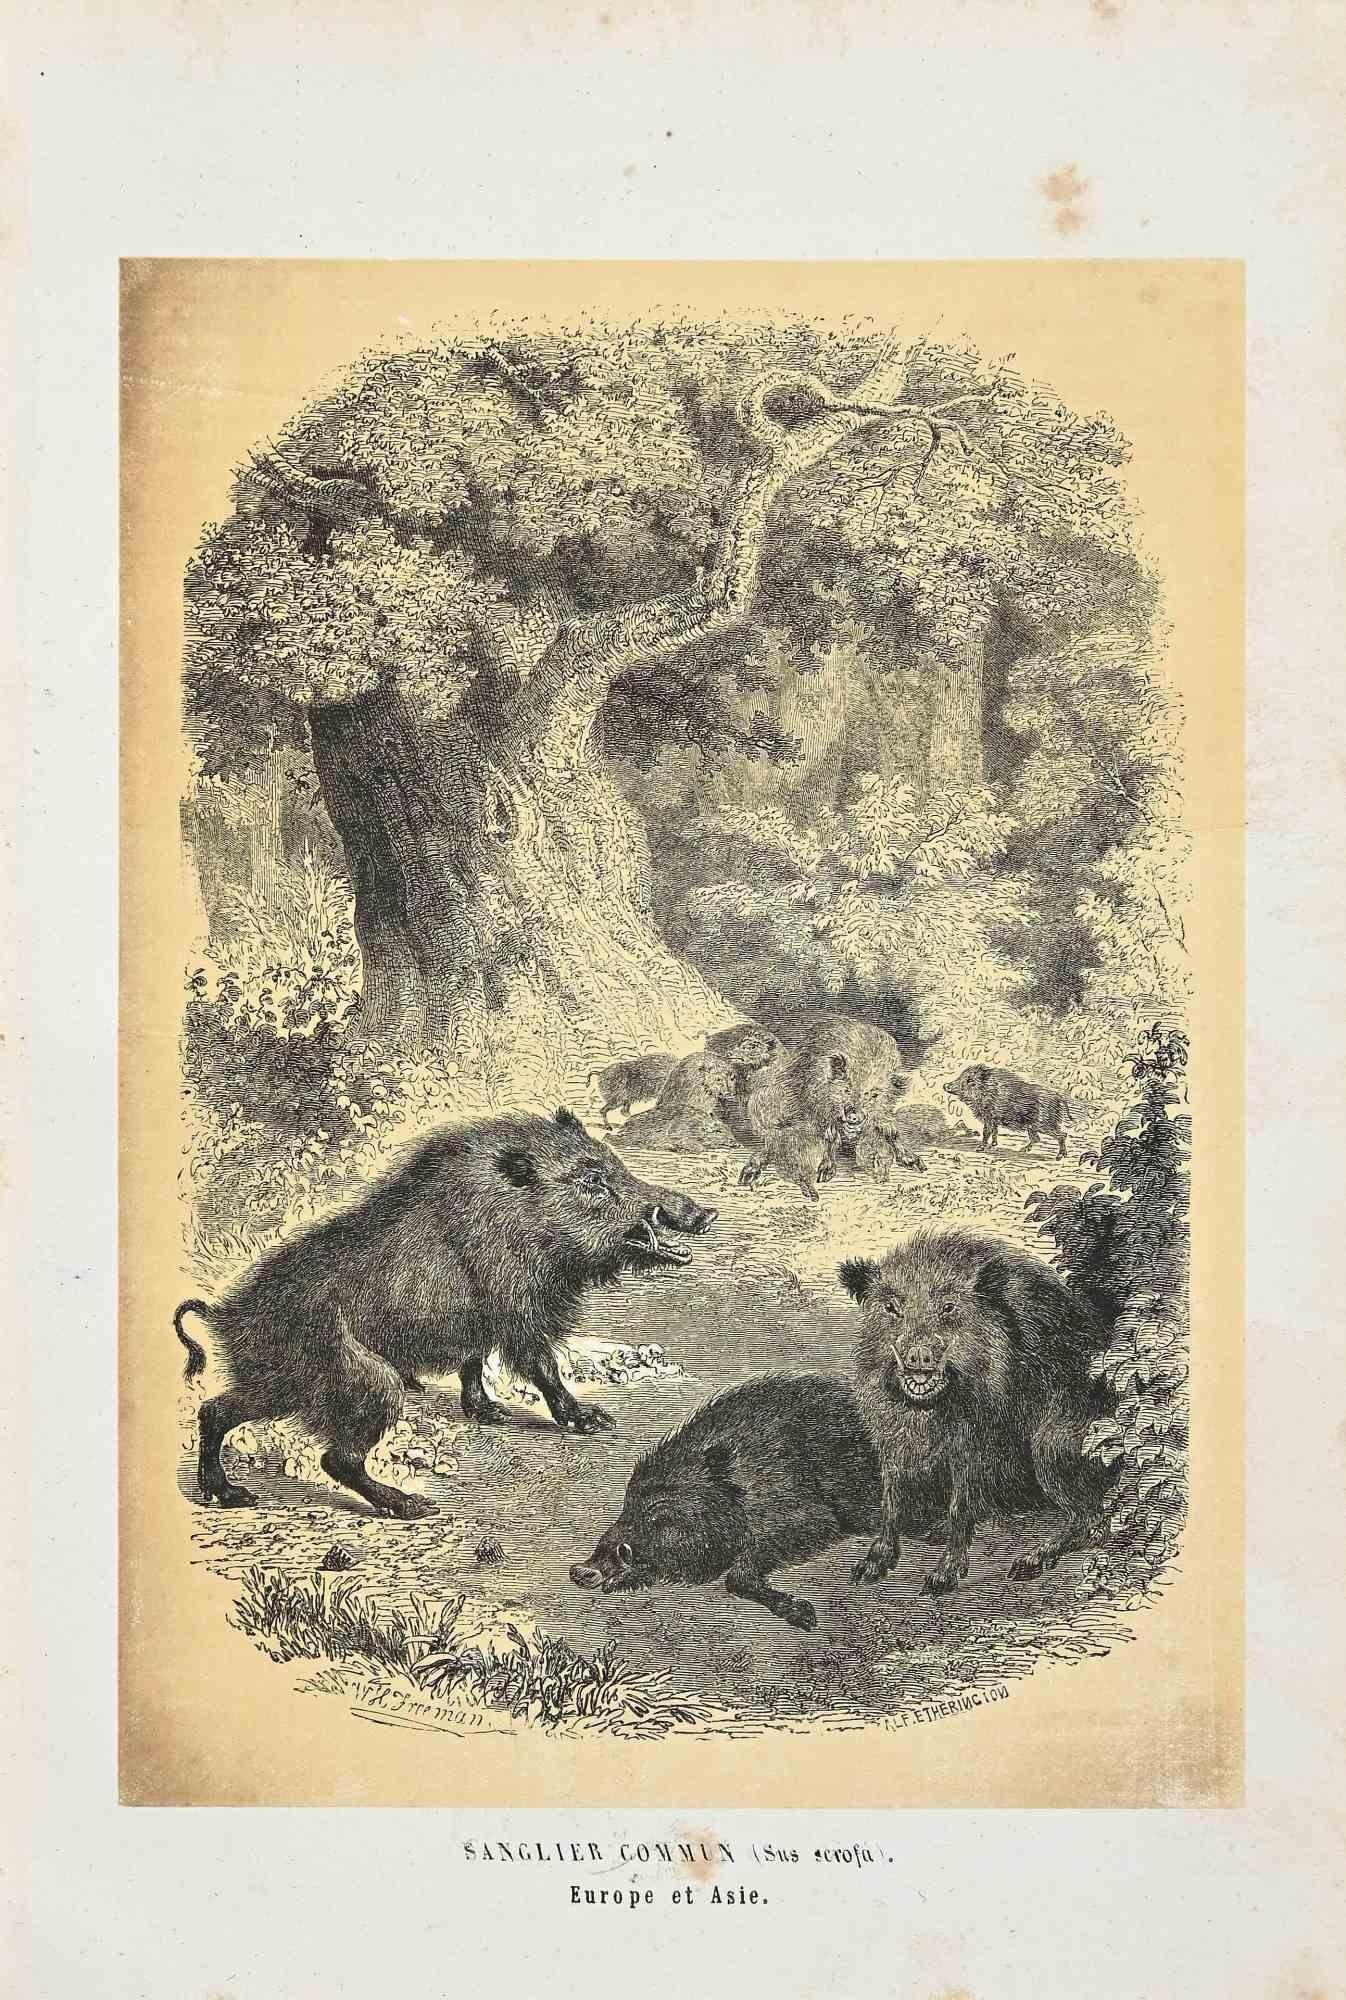 Wild Boar is an original lithograph on ivory-colored paper, realized by Paul Gervais (1816-1879). The artwork is from The Series of "Les Trois Règnes de la Nature", and was published in 1854.

Good conditions except for some foxings.

Titled on the